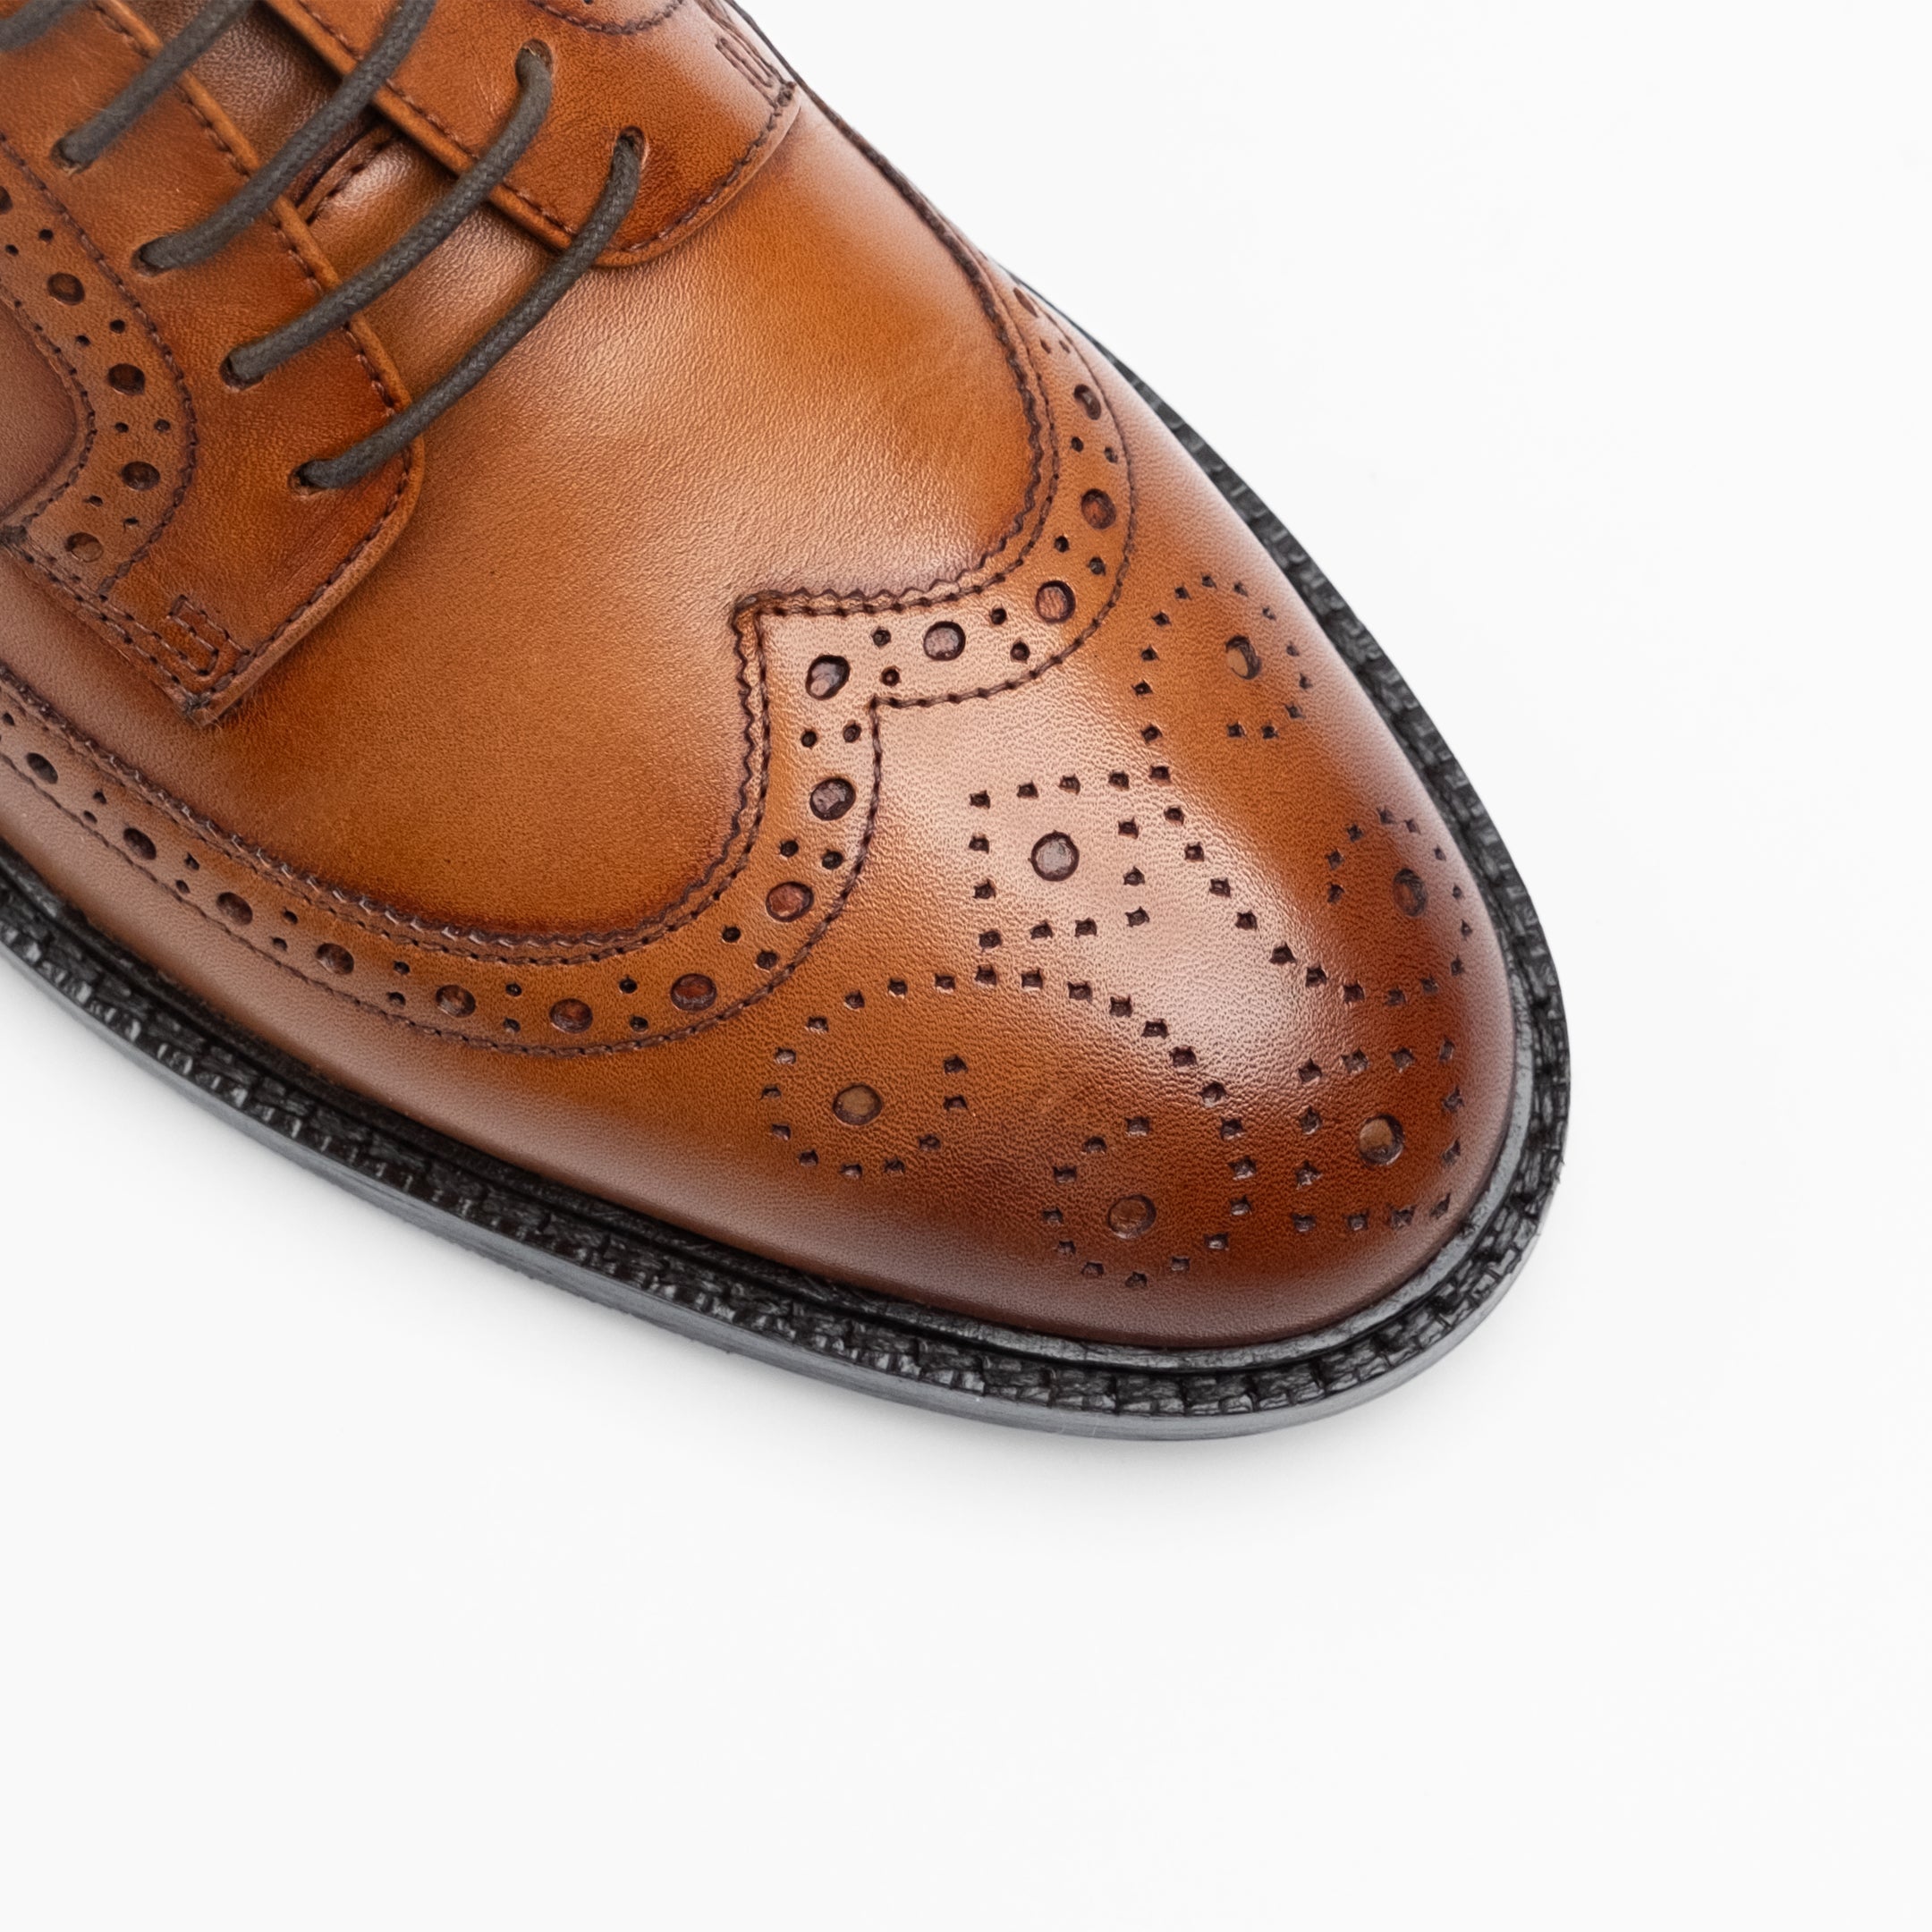 Walk London Mens Oliver Brogue Shoe in Tan Leather